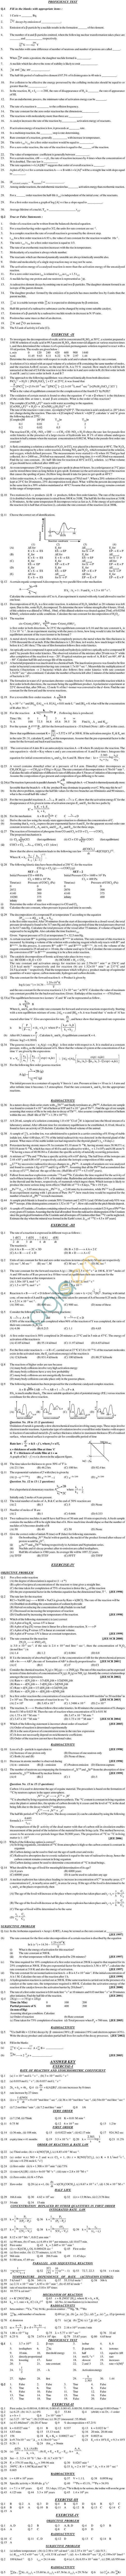 Chemistry Study Material - Chapter 10